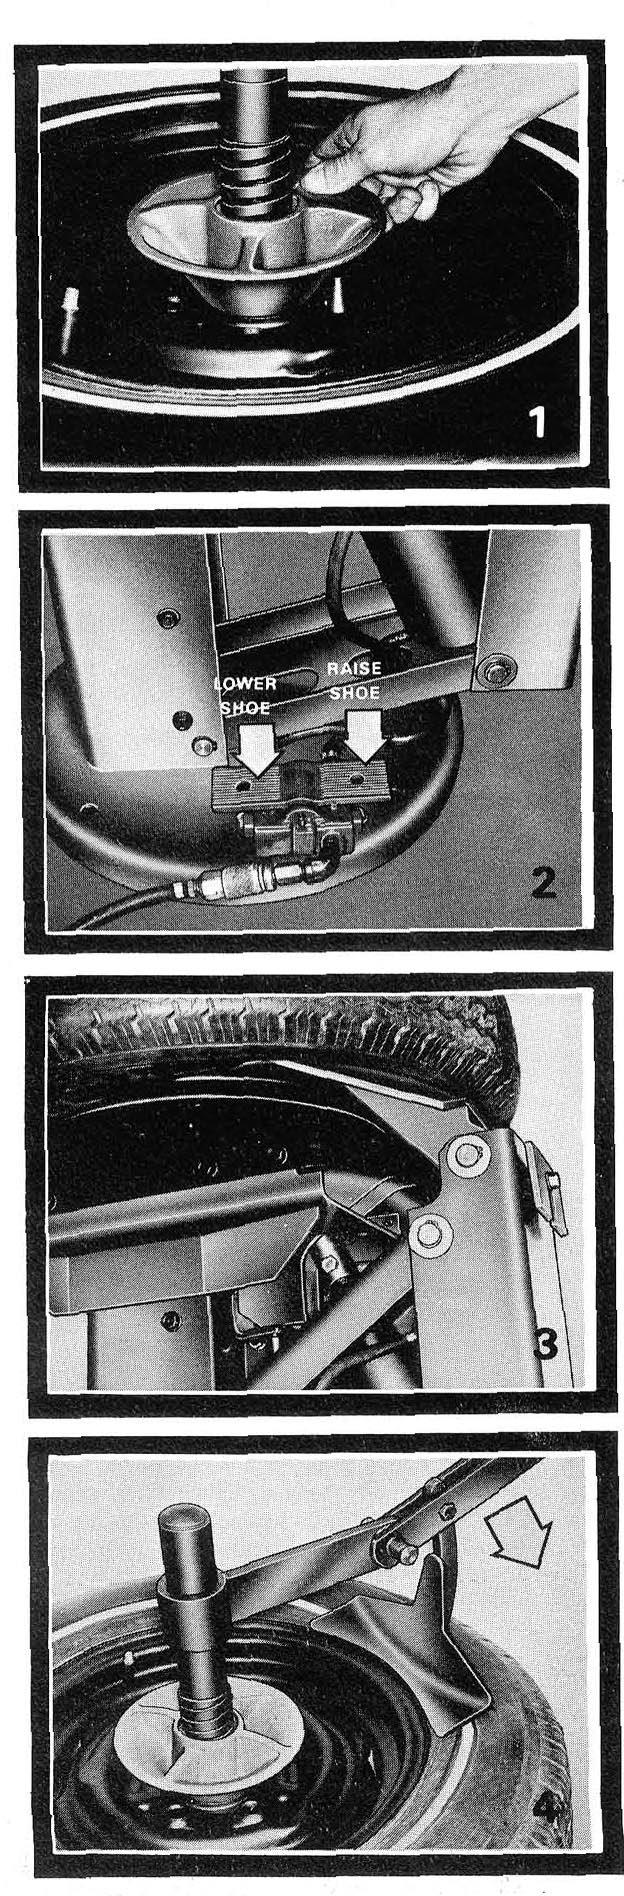 Depress the right pedal to raise the bottom bead loosener and loosen the tire bead from the rim. Depress the left pedal to lower the bead loosener. See Fig. 2 and 3.